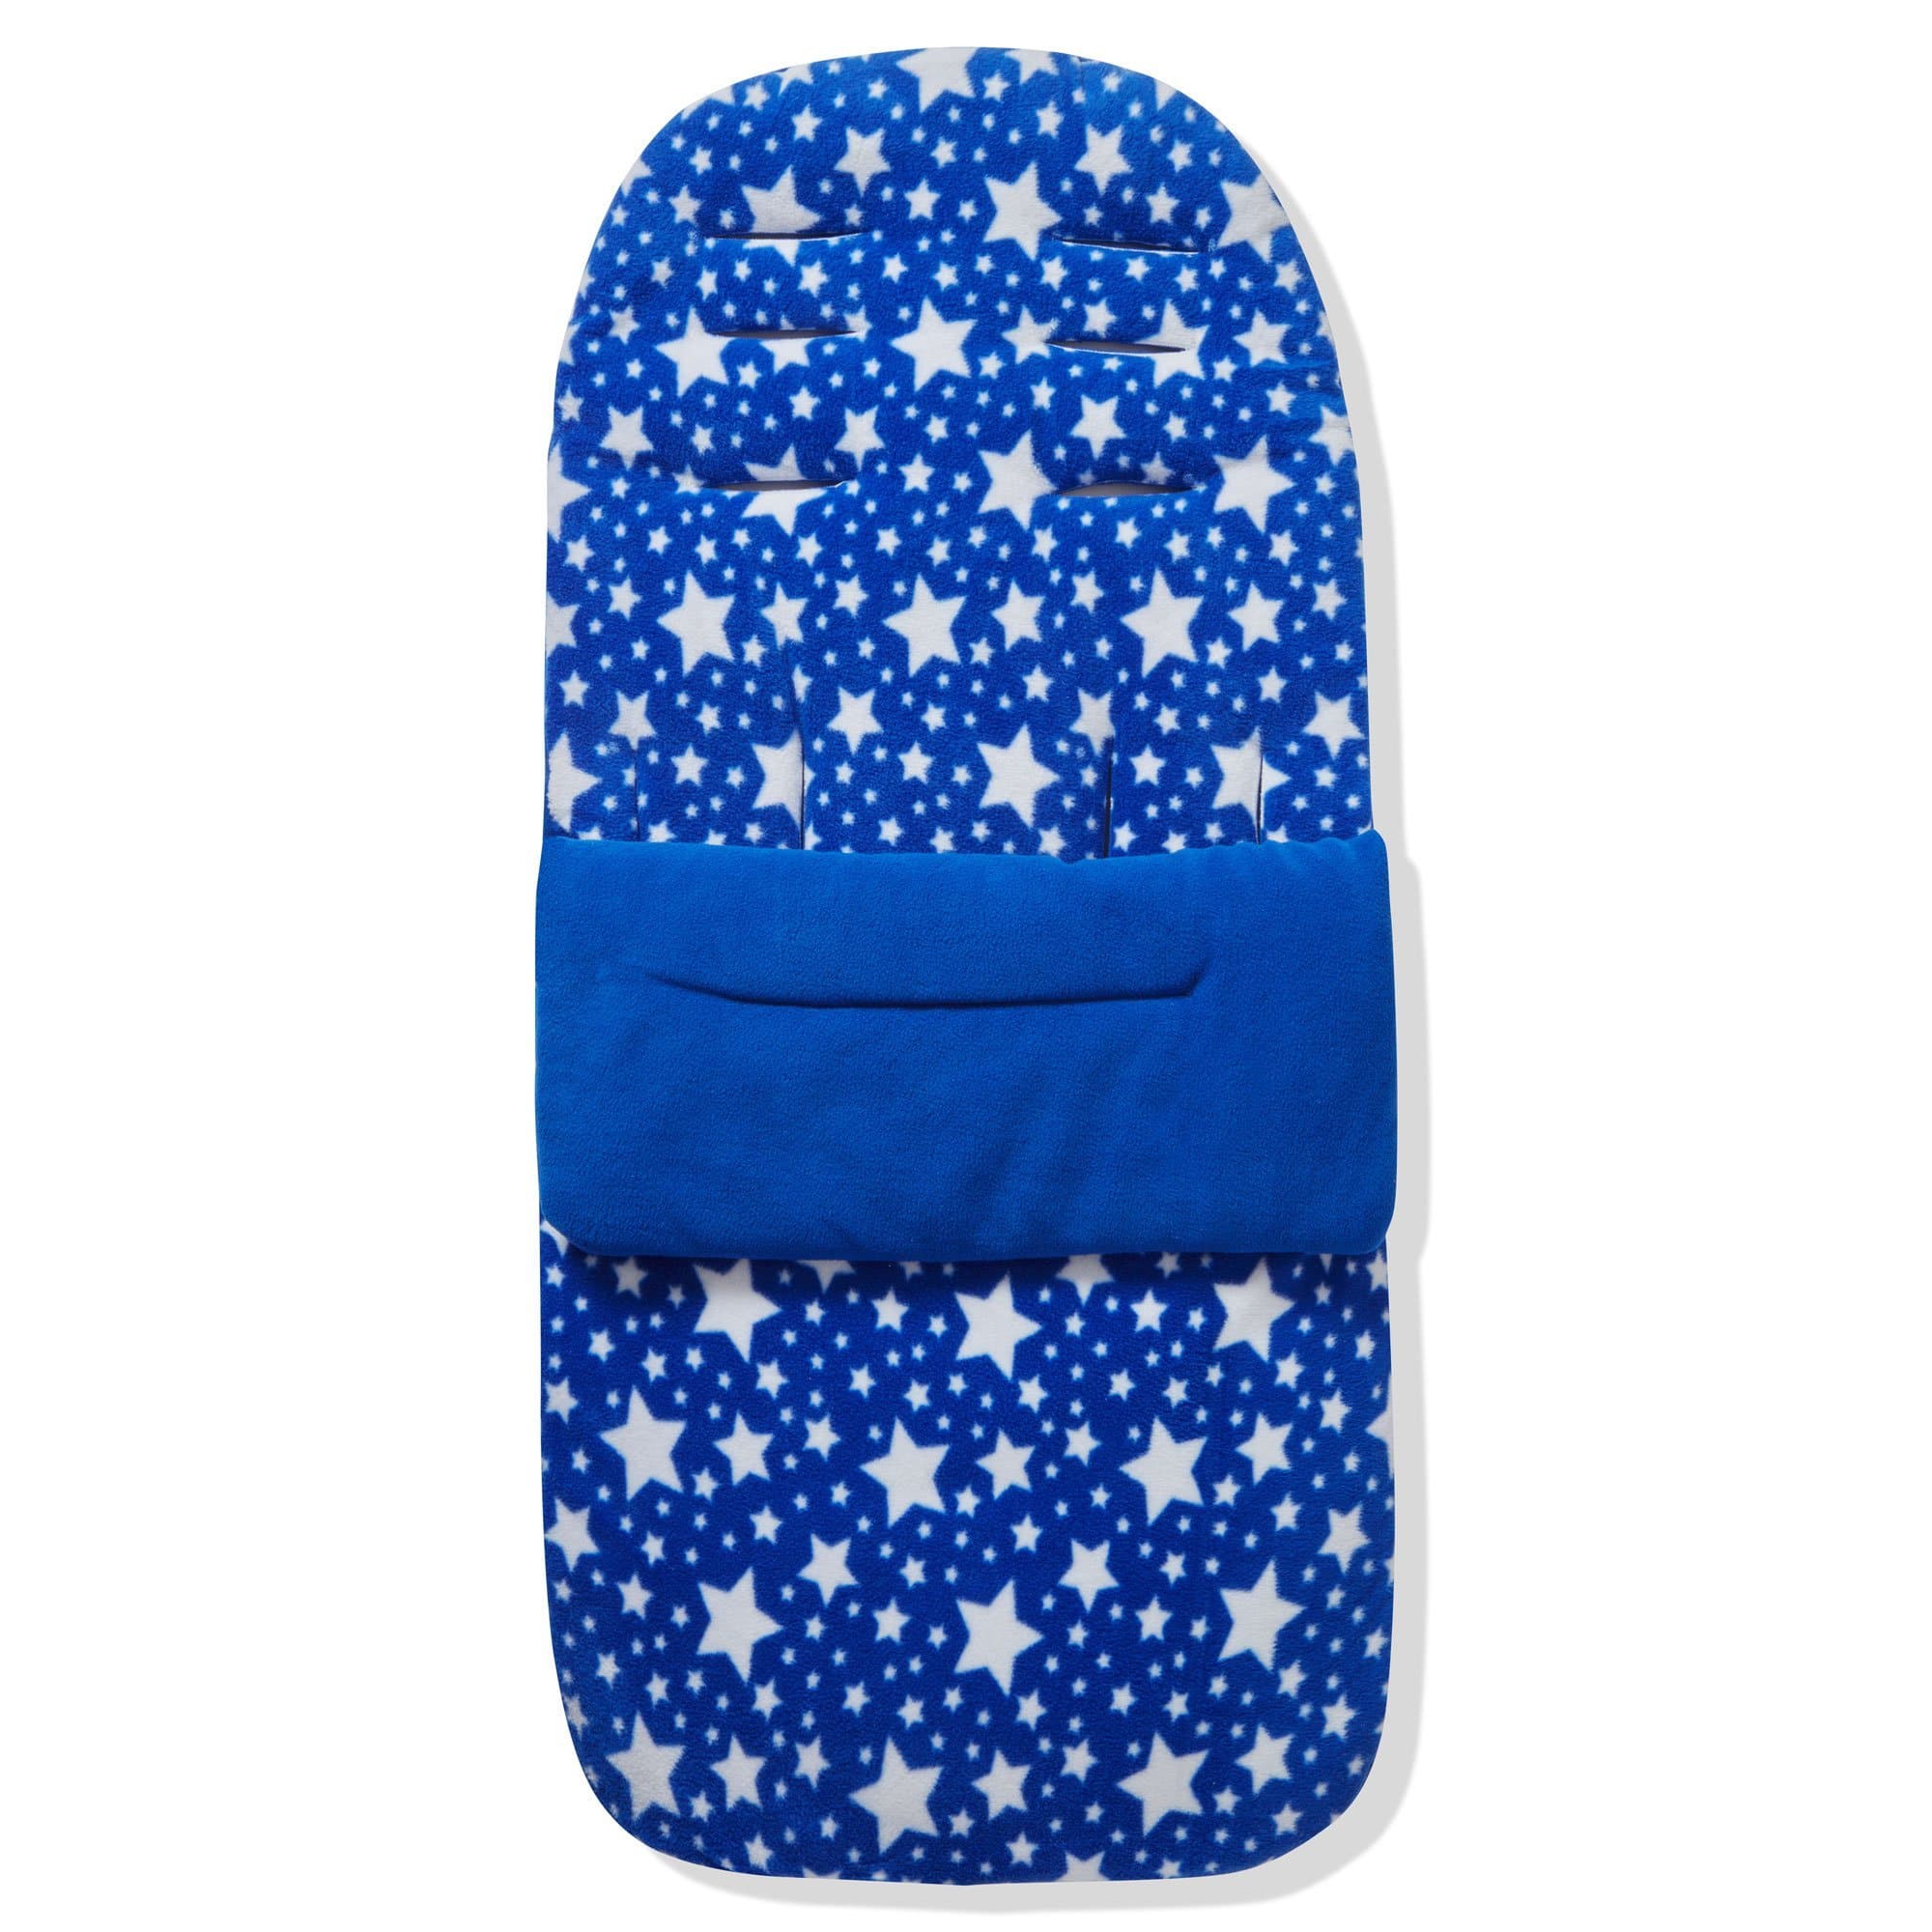 Fleece Footmuff / Cosy Toes Compatible with ABC Design - Blue Star / Fits All Models | For Your Little One